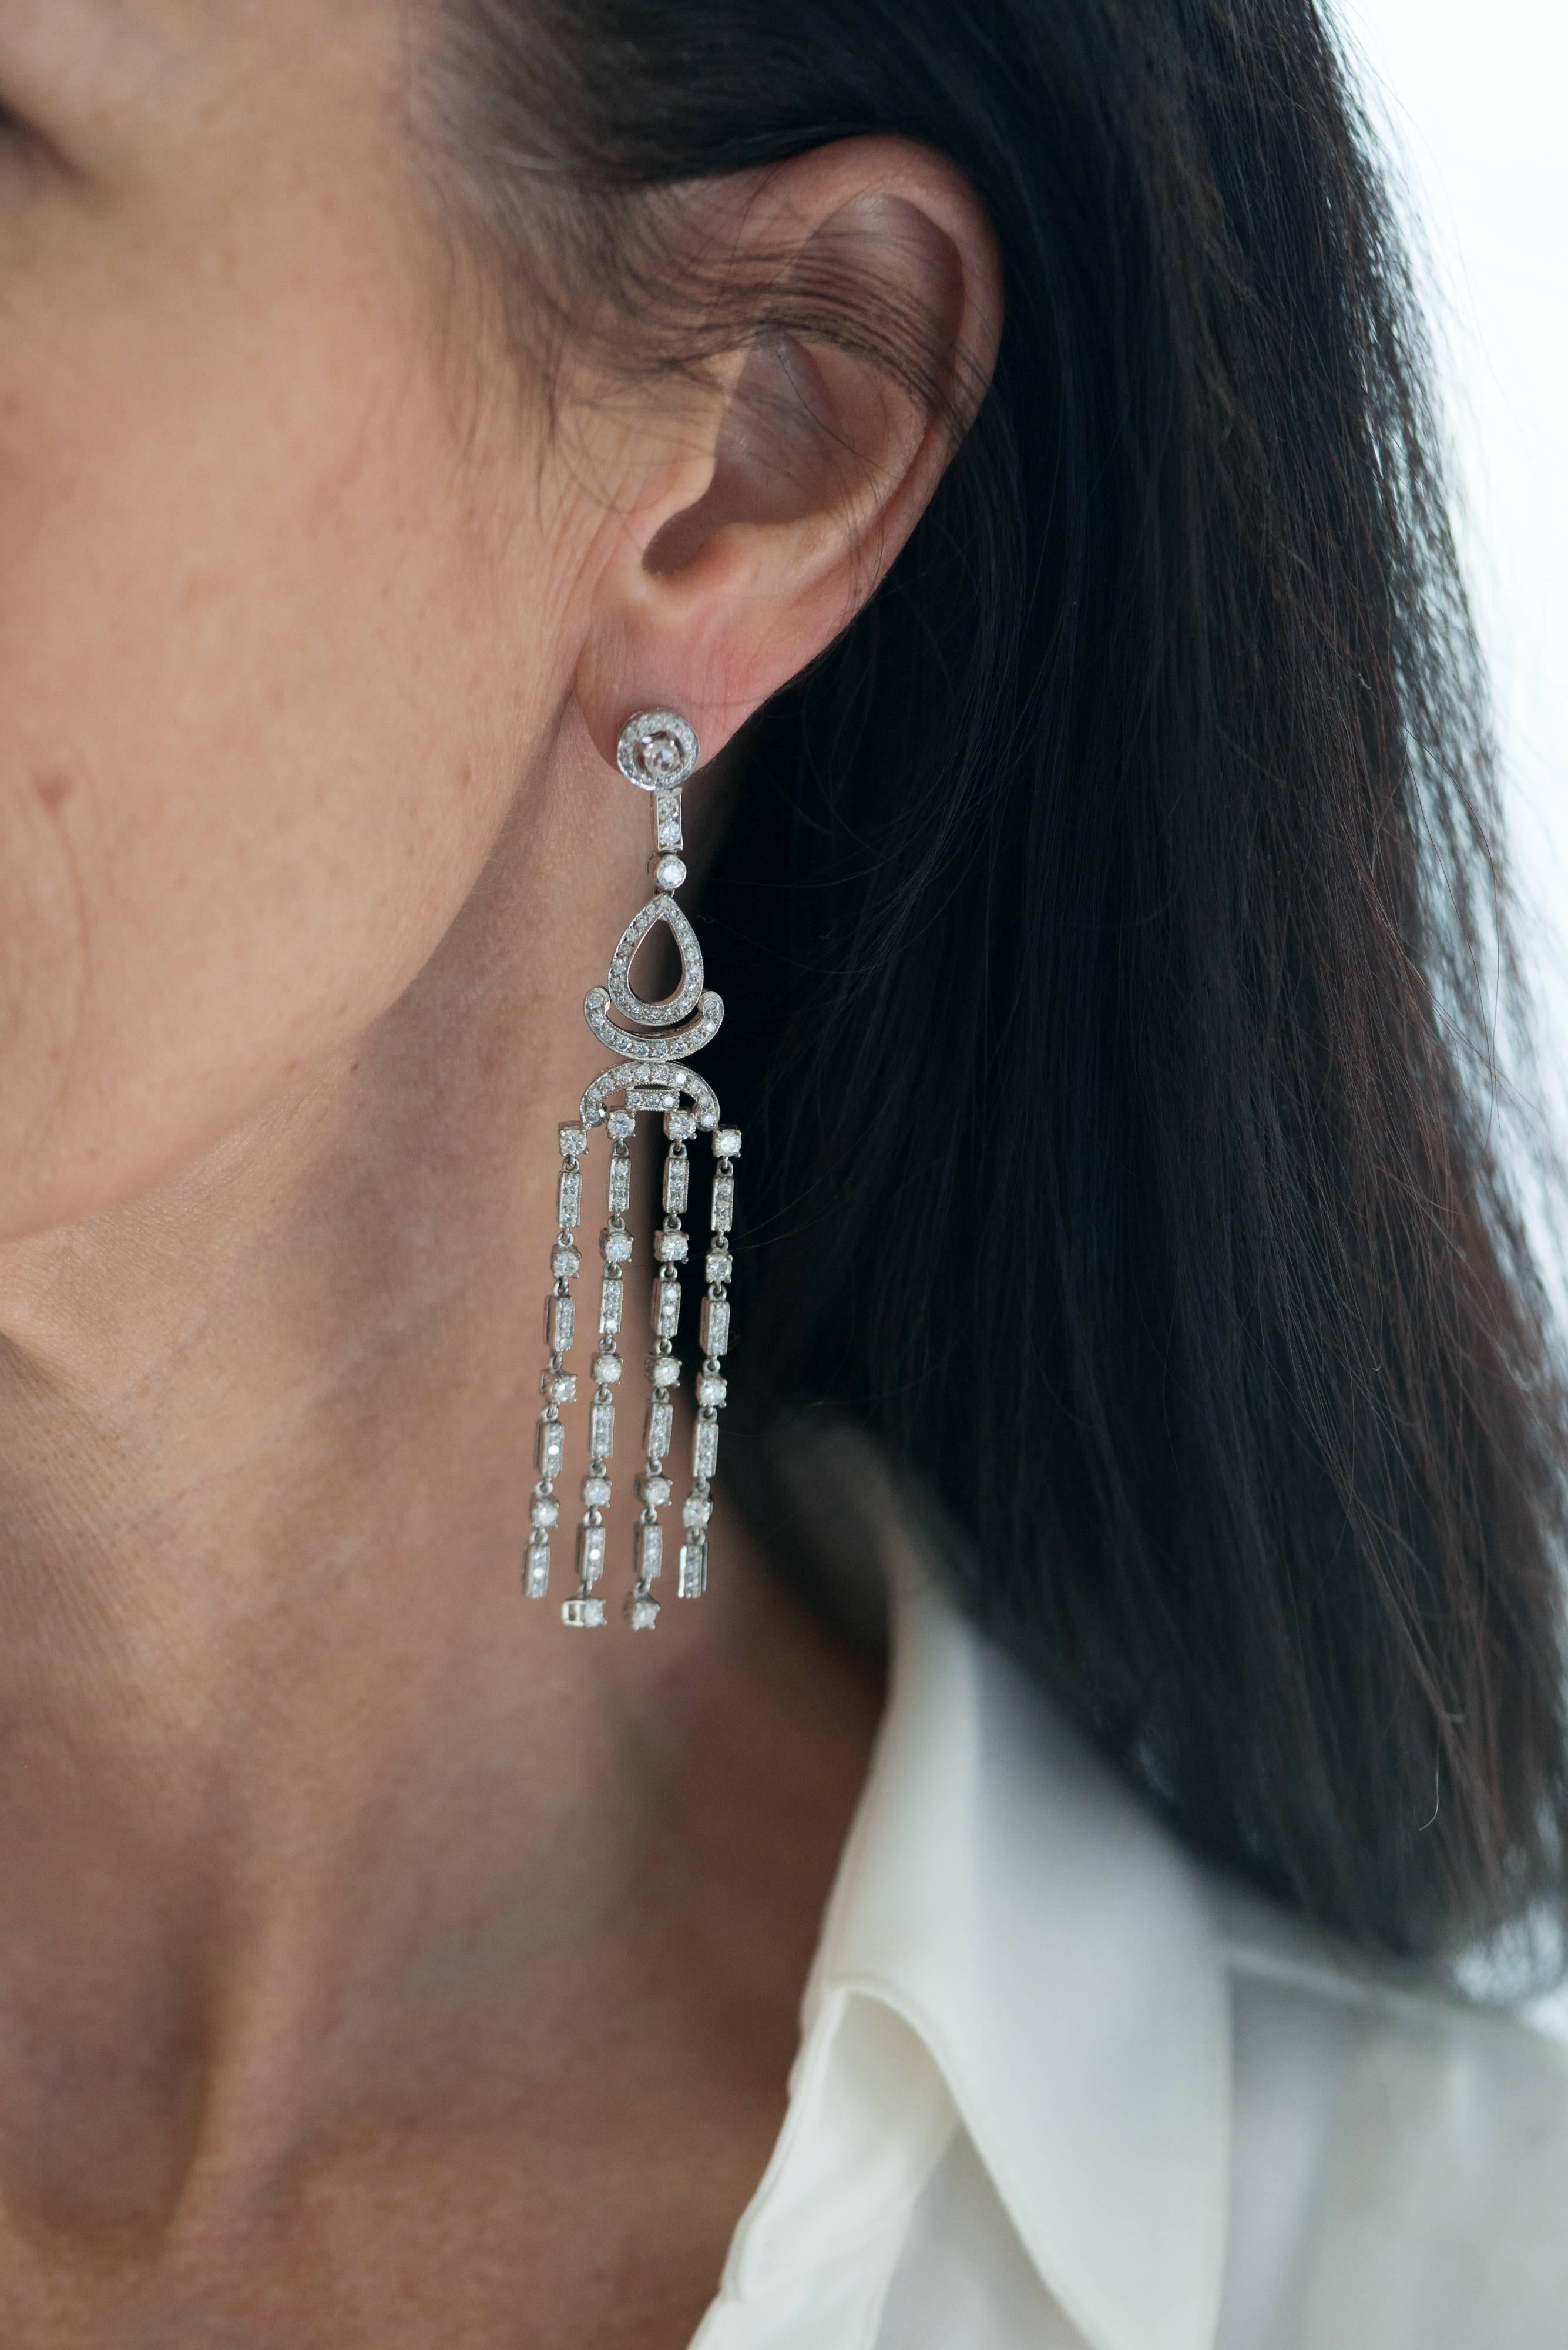 These Chandelier Earrings measure a long 3.5 inches and feature 6.3 carats of diamonds set in 18 karat white gold. The main body of each earring is hinged in 4 places and features 4 strands of diamond fringe, all combining to maximize the sparkle